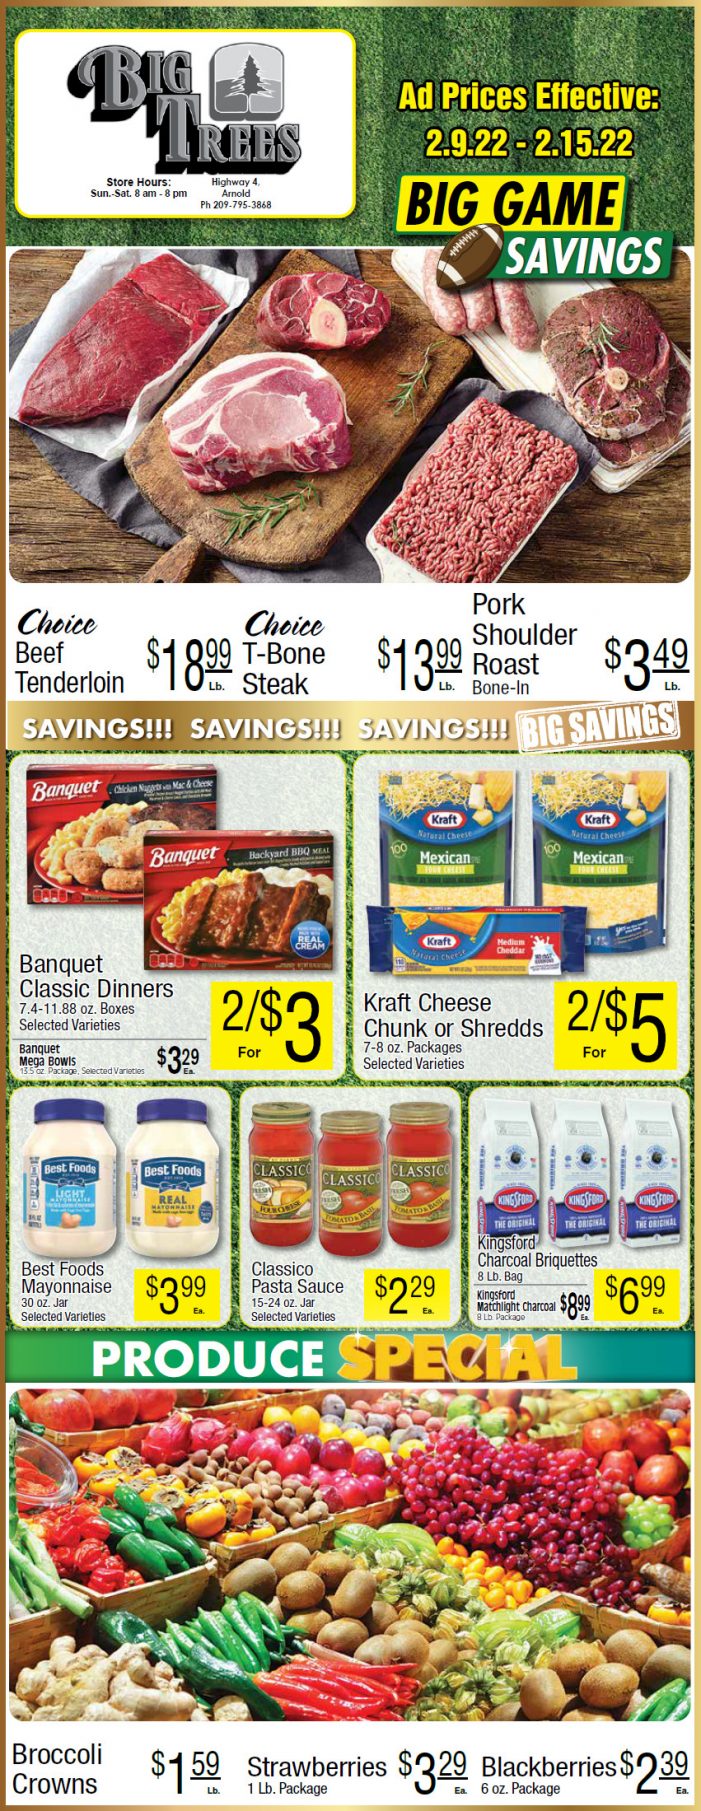 Big Trees Market Weekly Ad & Grocery Specials February 9th Through The 15th! Shop Local & Save!